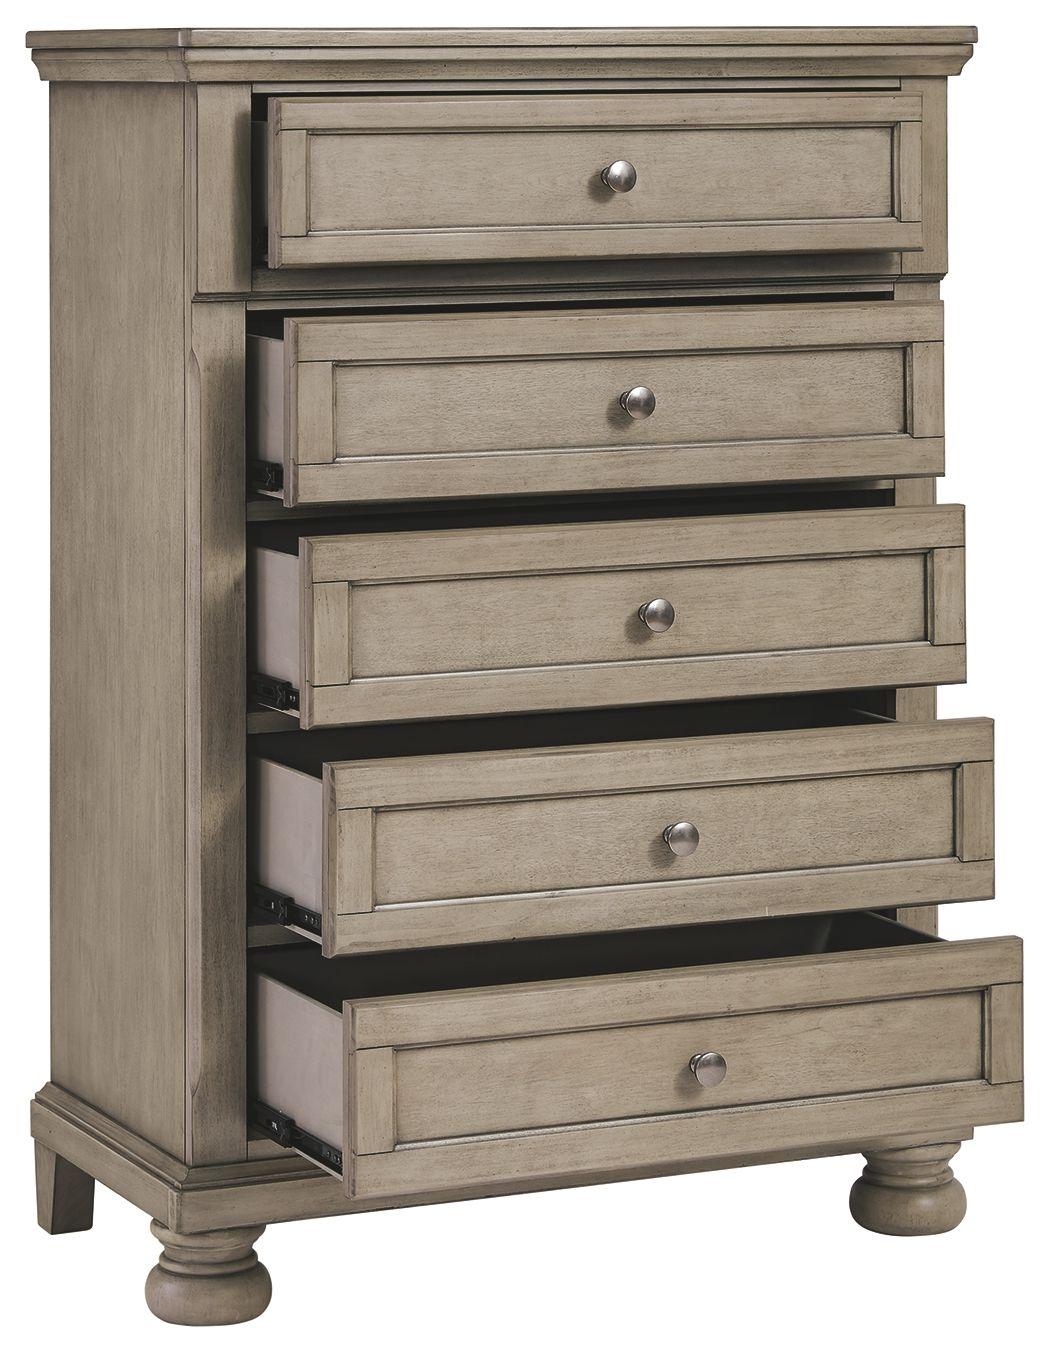 Ashley Furniture - Lettner - Light Gray - Five Drawer Chest - Central Handle - 5th Avenue Furniture